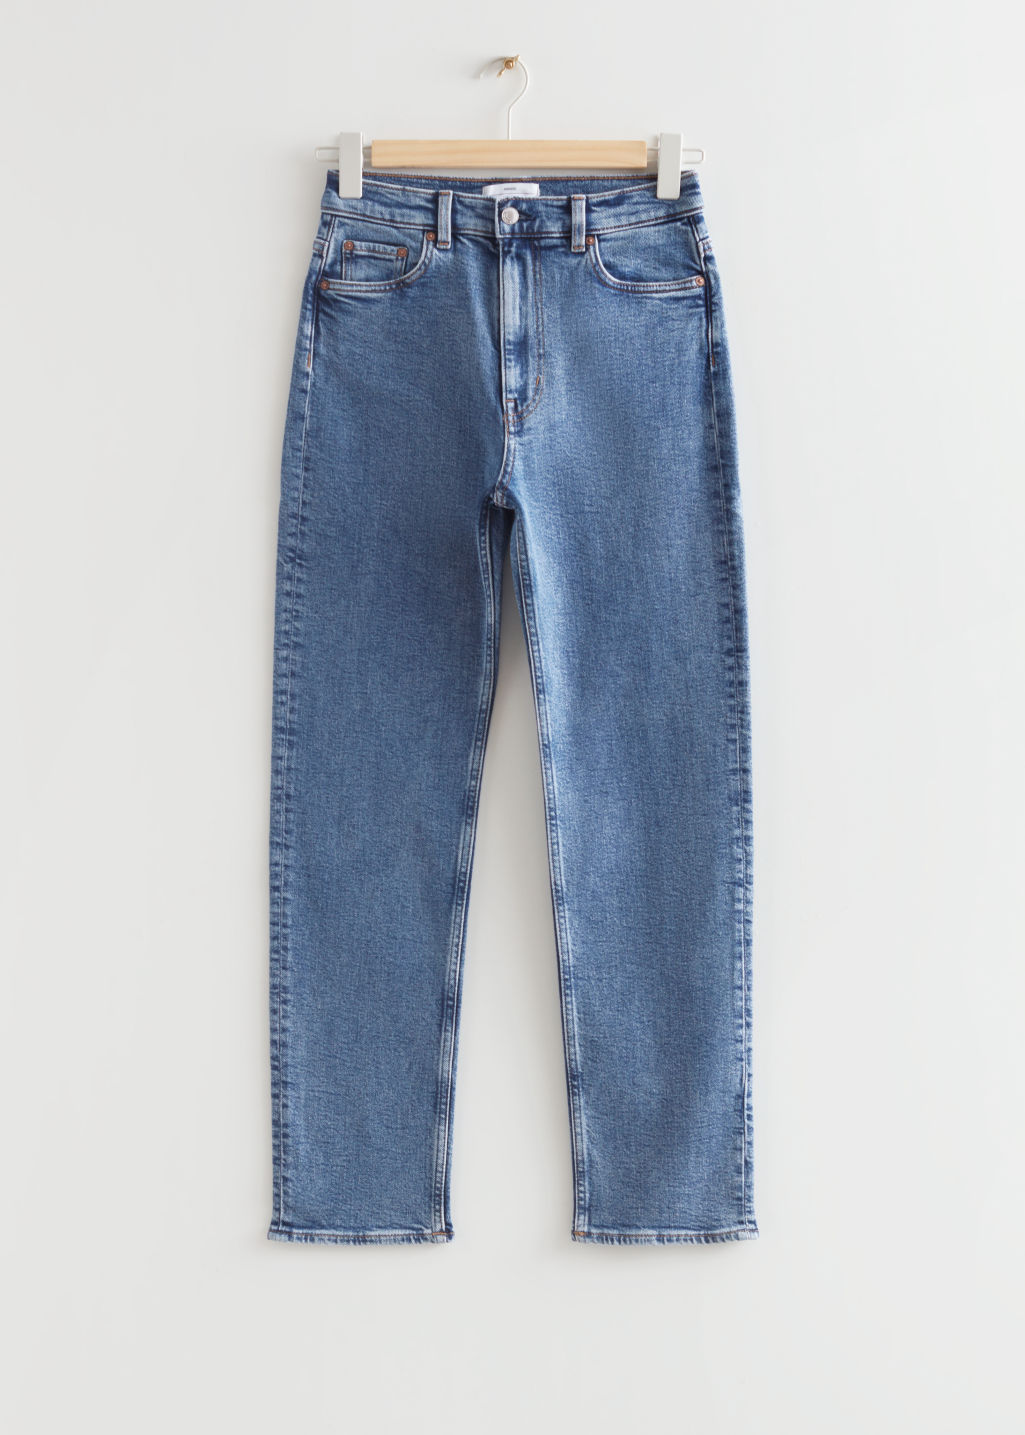 These & Other Stories Jeans Are a Fashion-Girl Favourite | Who What Wear UK